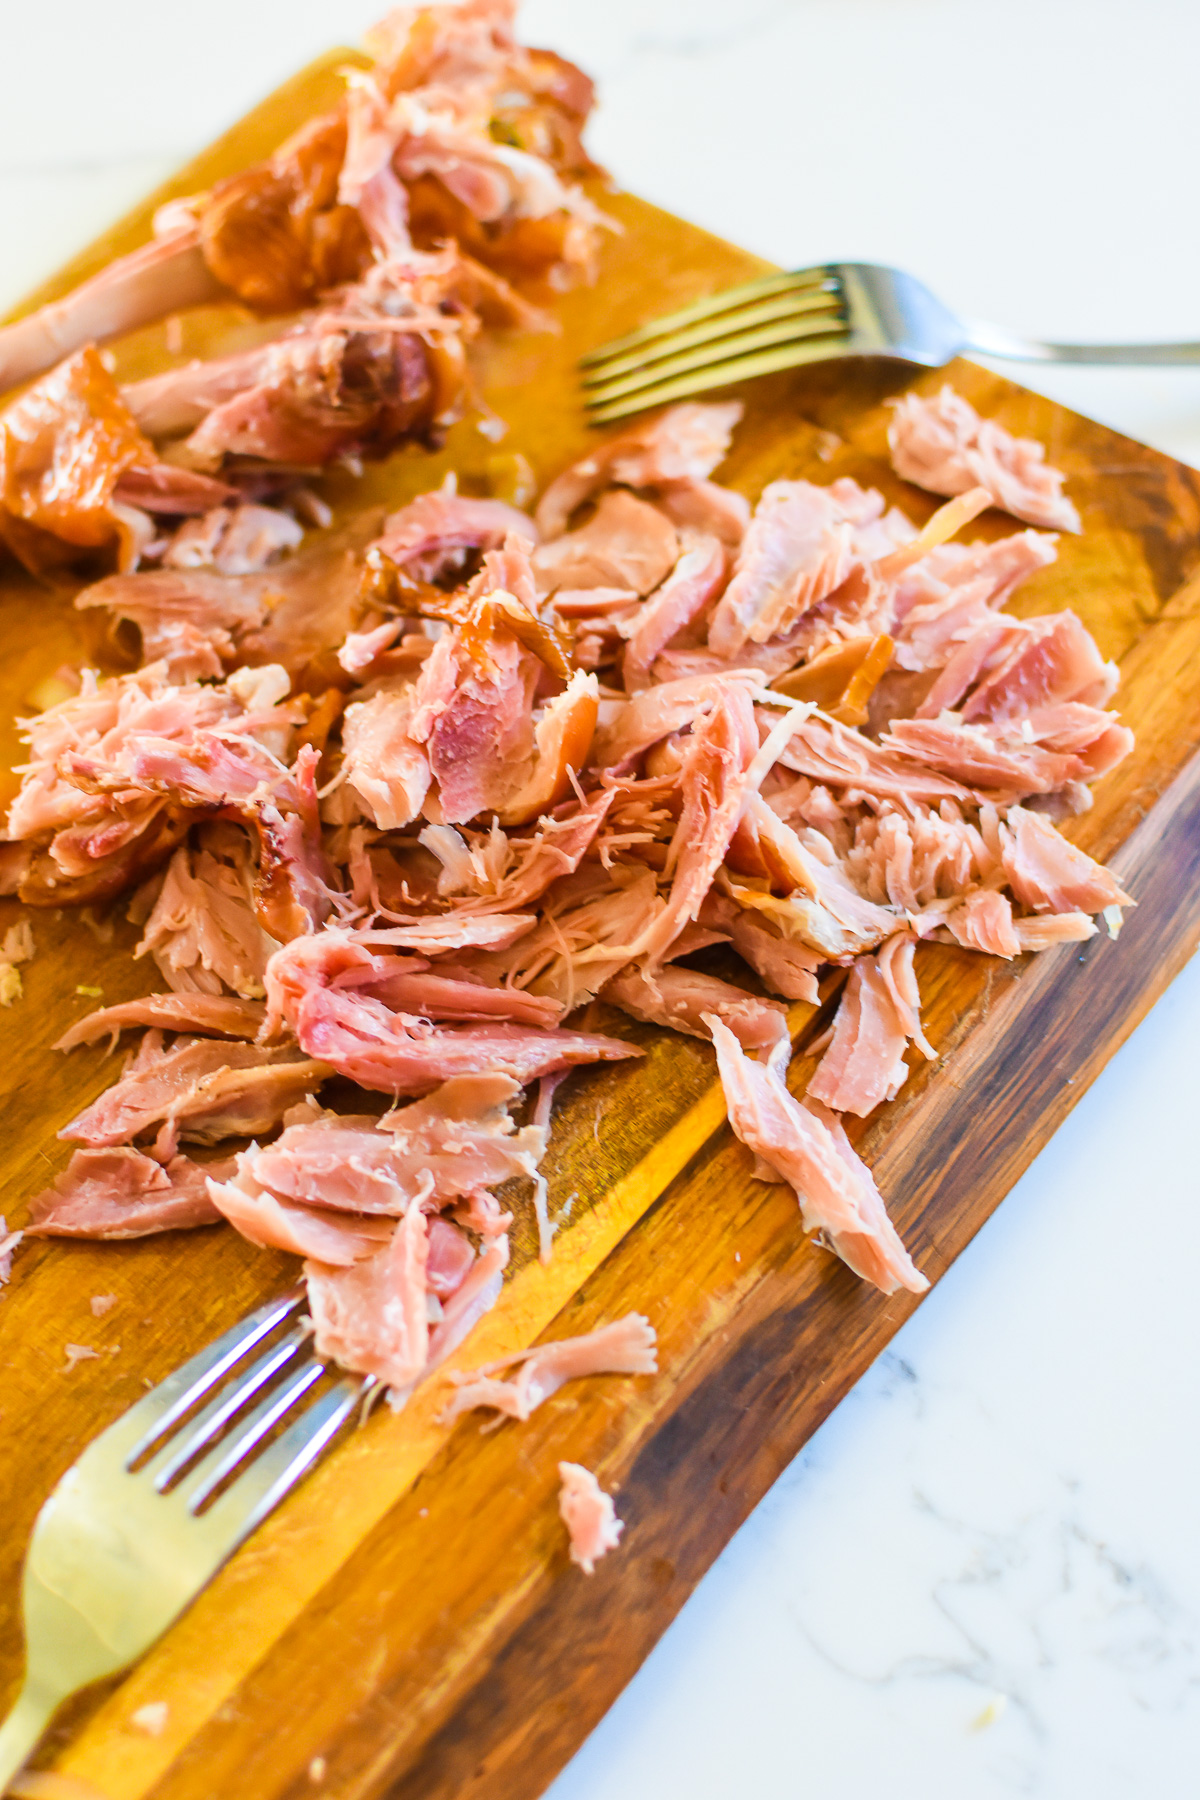 shredded smoked turkey meat on wooden cutting board with two forks.